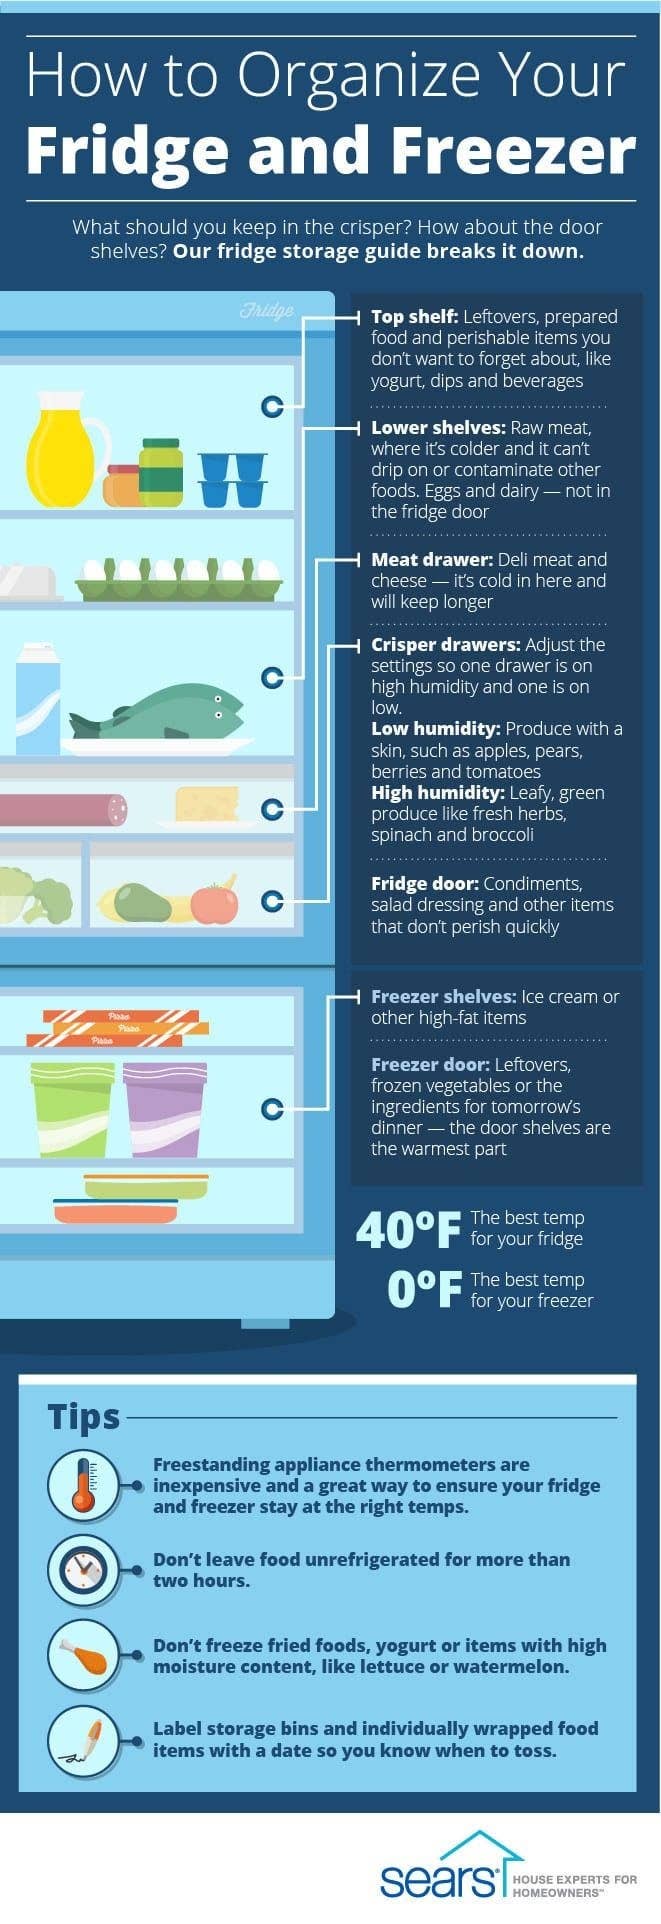 Here's How To Store Your Food So It Lasts Longer